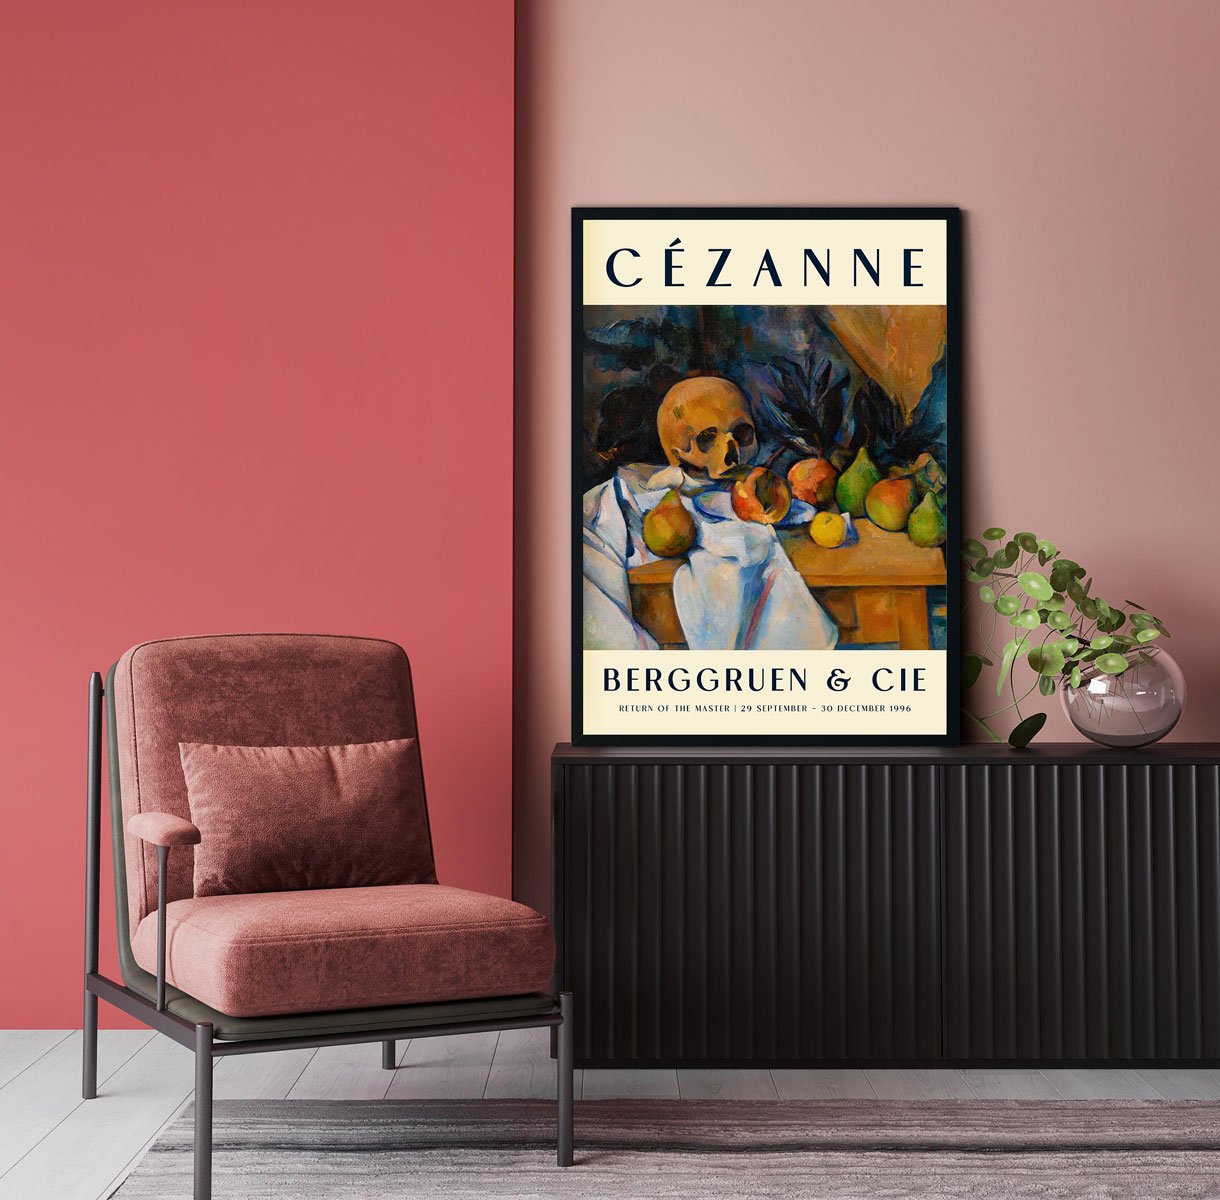 Cézanne Still Life with Skull Art Exhibition Poster